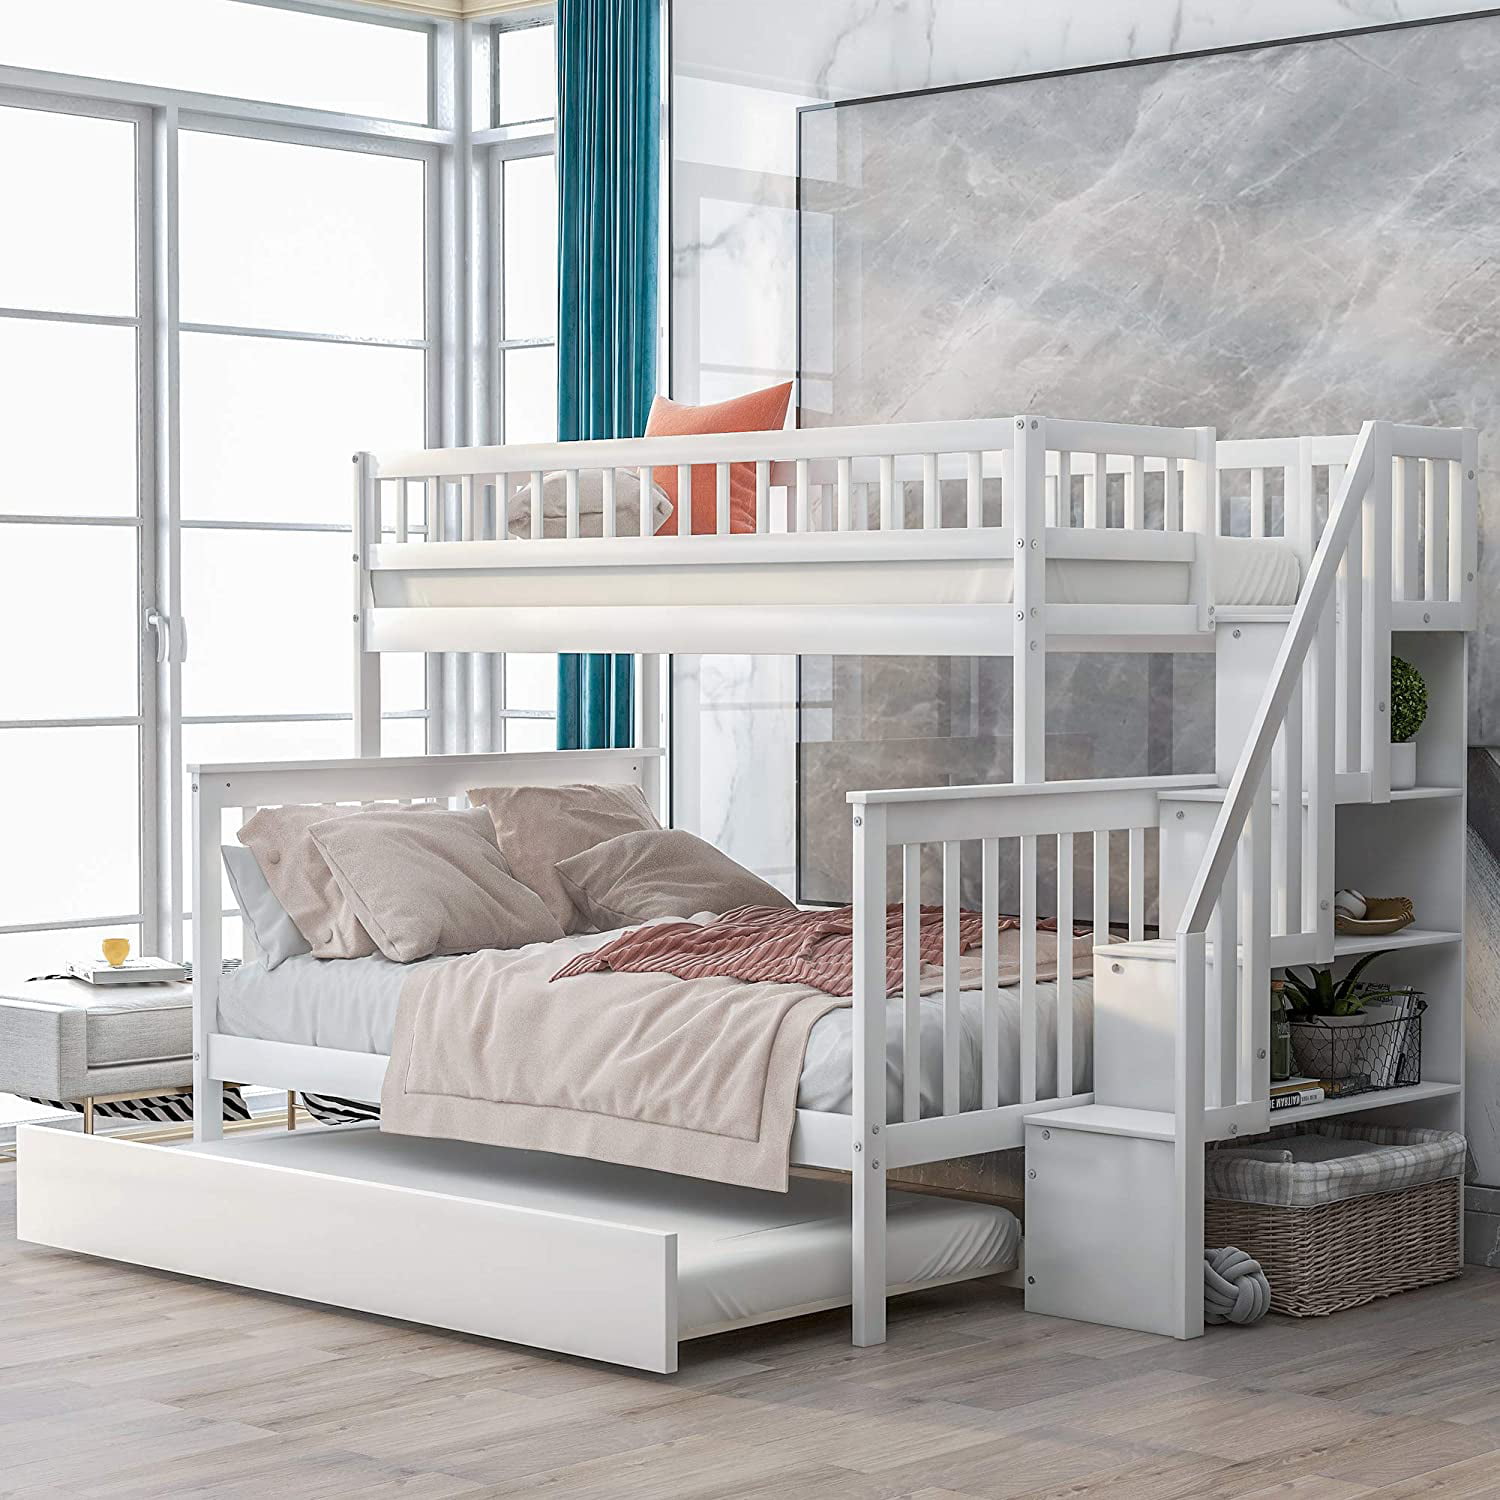 Piscis Bunk Bed Beds Twin Over, Wood Bunk Beds Twin Over Full With Trundle